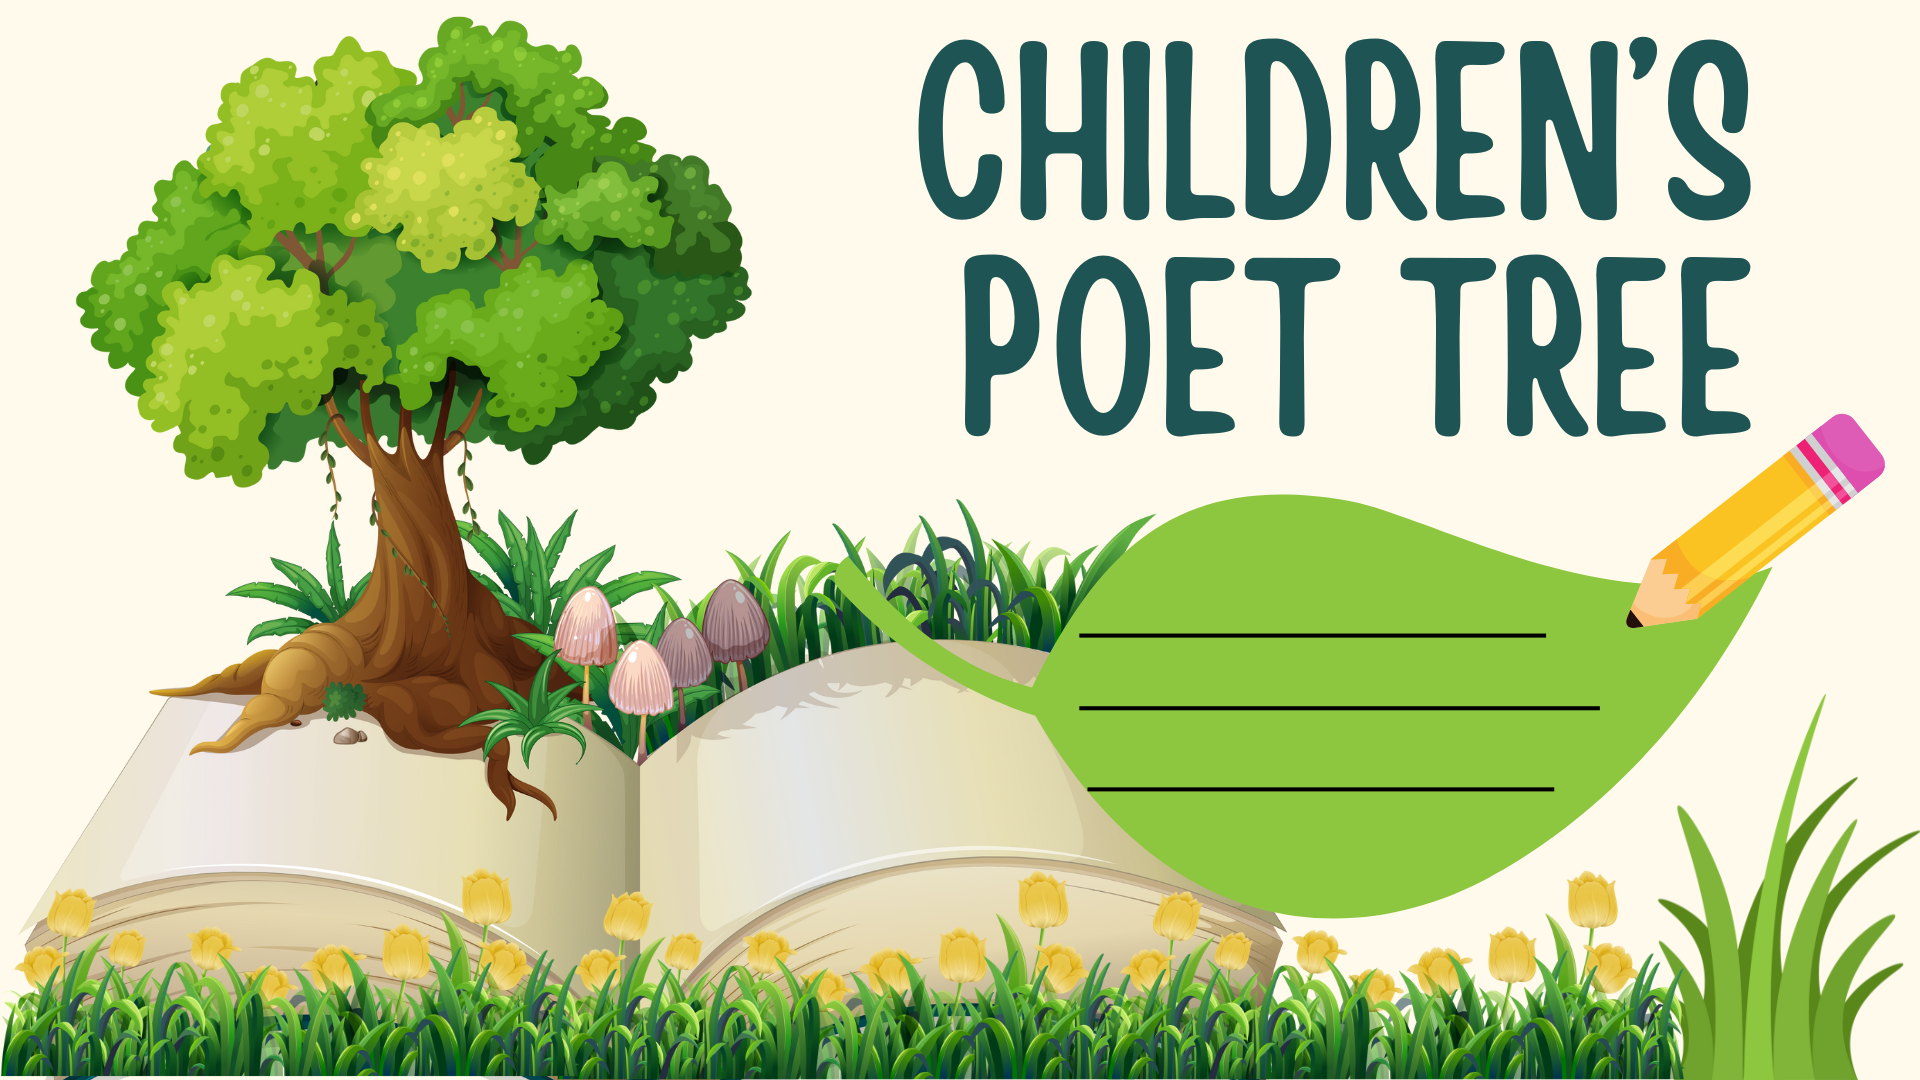 Poetry, library, children